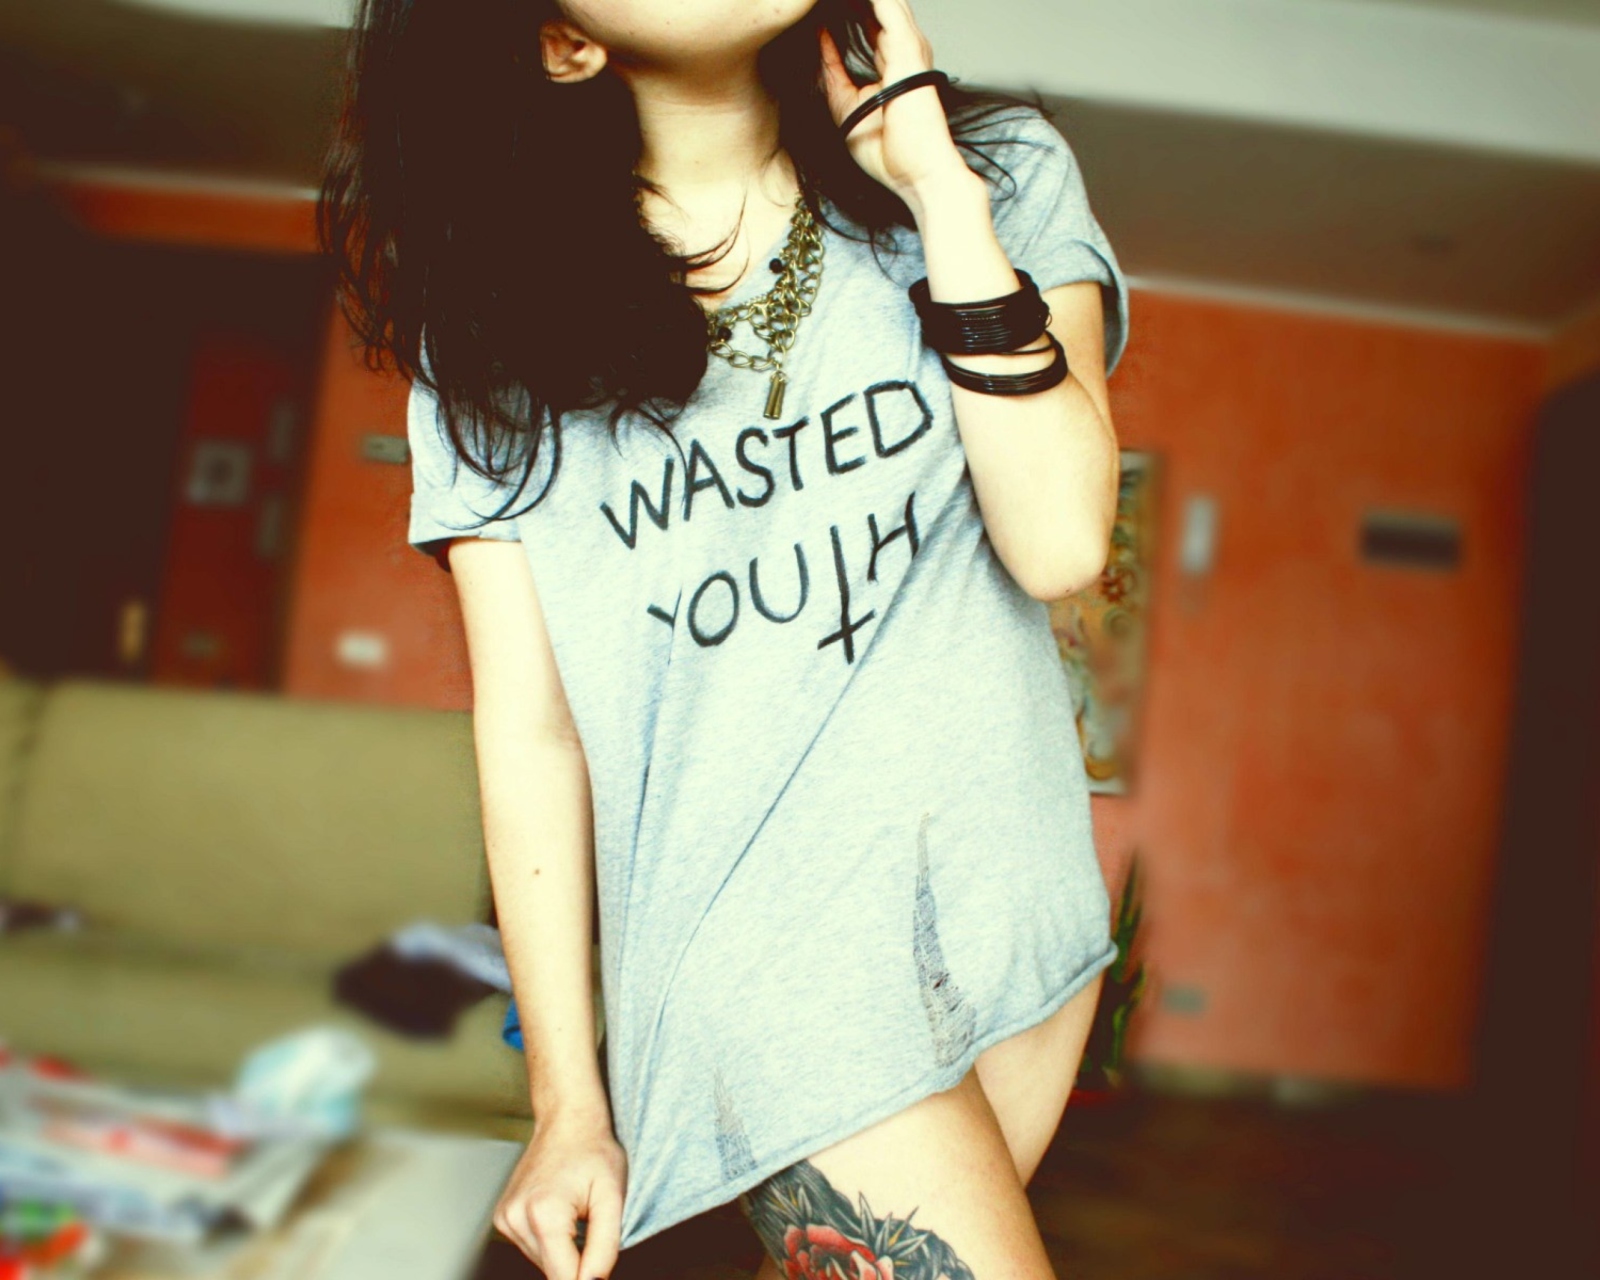 Wasted Youth T-Shirt wallpaper 1600x1280